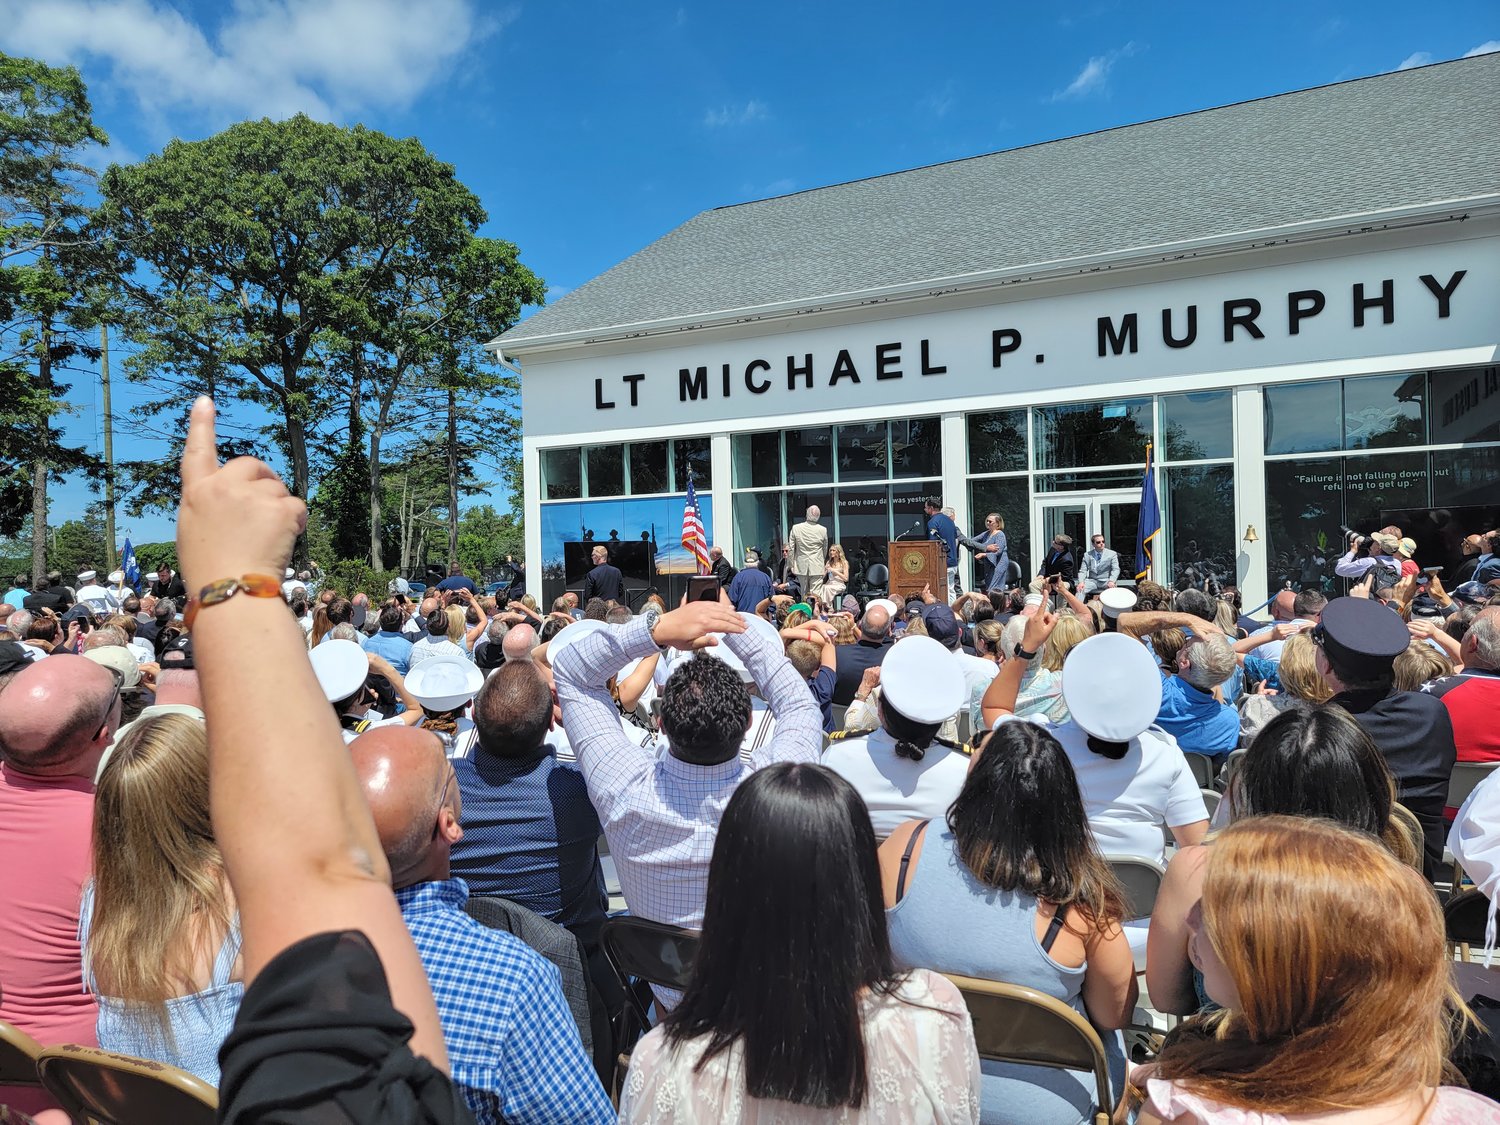 Over 1,000 attendees came to the ribbon cutting of the Lt. Michael Murphy Navy SEAL Museum. The crowd was treated to a special descent by the Navy’s Leapfrog team, who parachuted down to the West Sayville Golf Course driving range, next door to the museum.